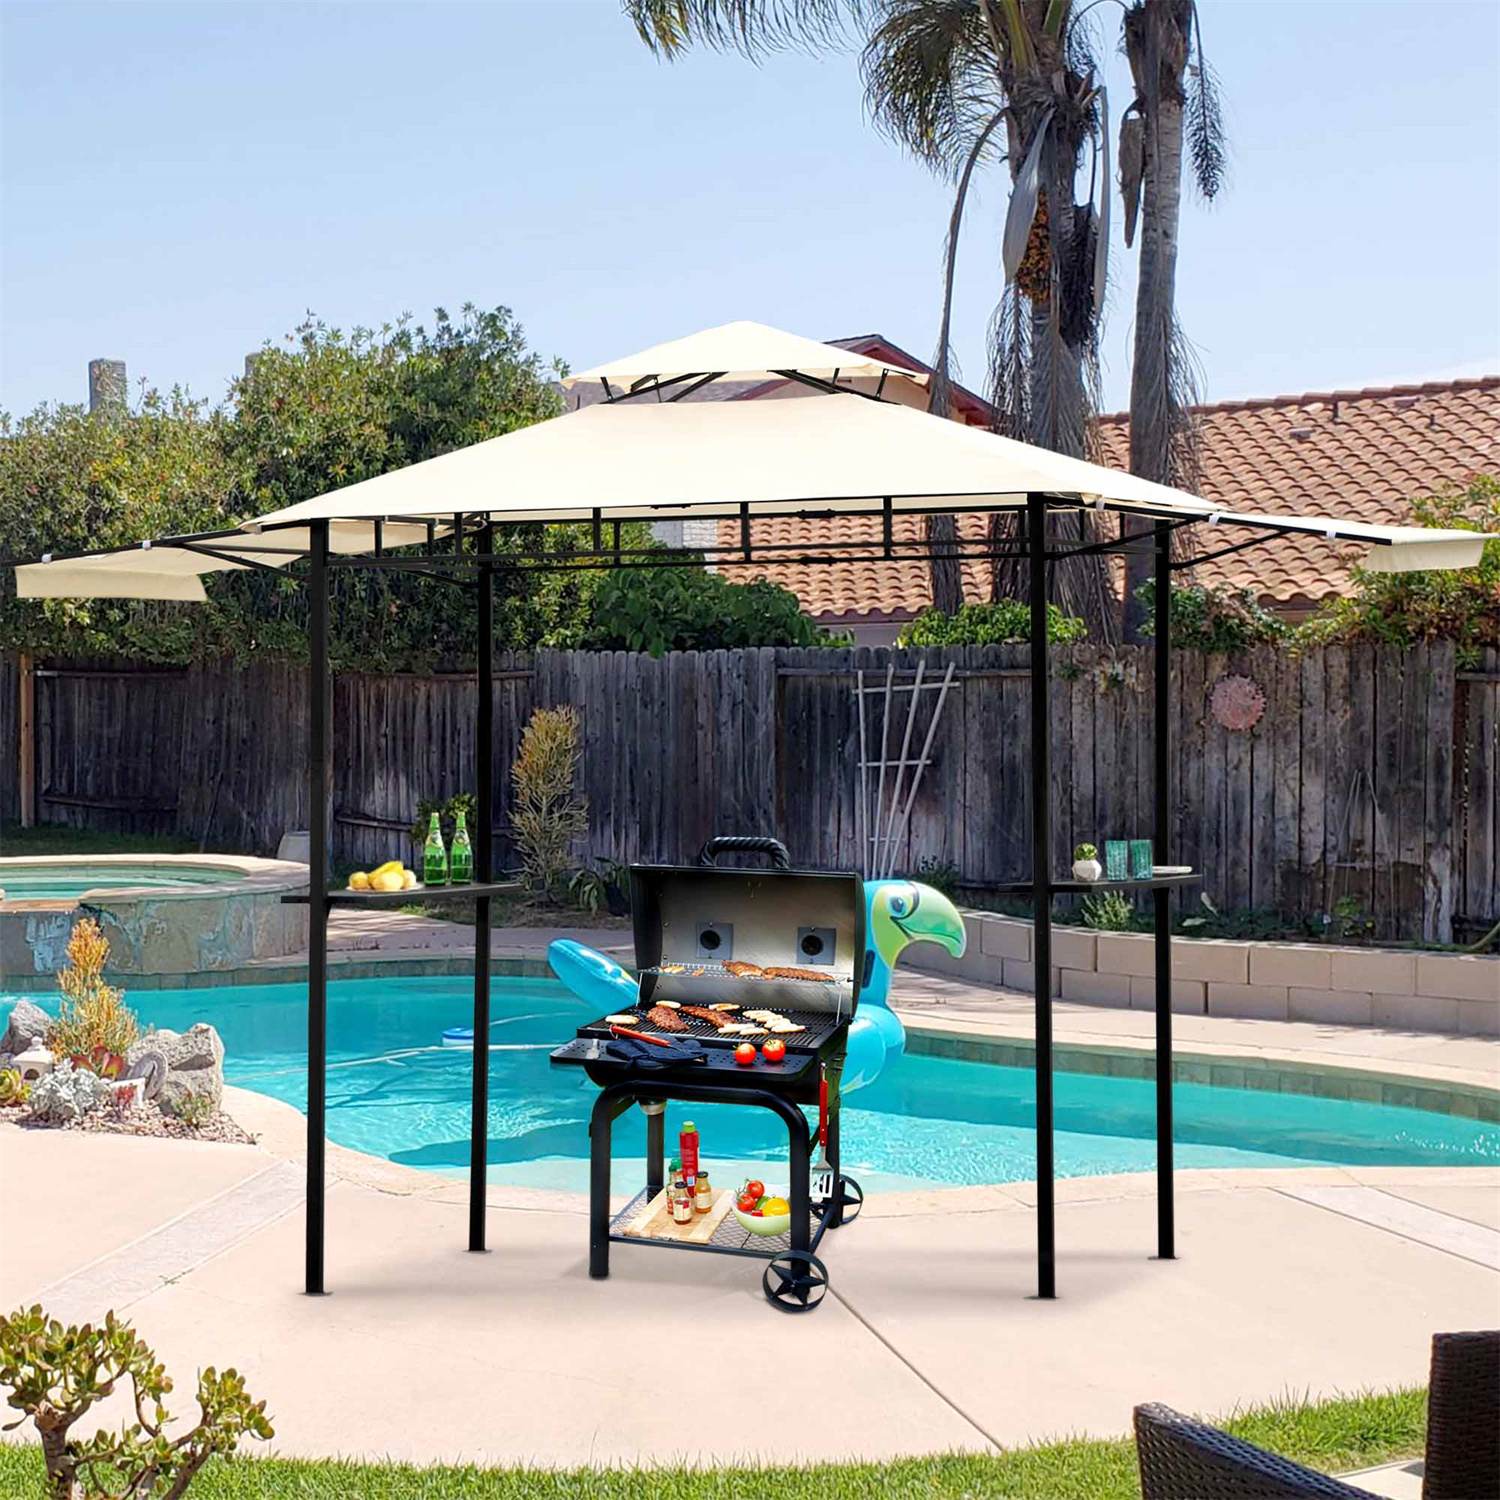 13.5x4.5 Ft Grill Gazebo Double Tier BBQ Gazebo with Dual Side Extendable Shades Outdoor Barbecue Grill Gazebo Shelter with 2 Side Shelves and Heavy-Duty Steel Frame for Patio, Garden, Beach, Beige - image 1 of 7